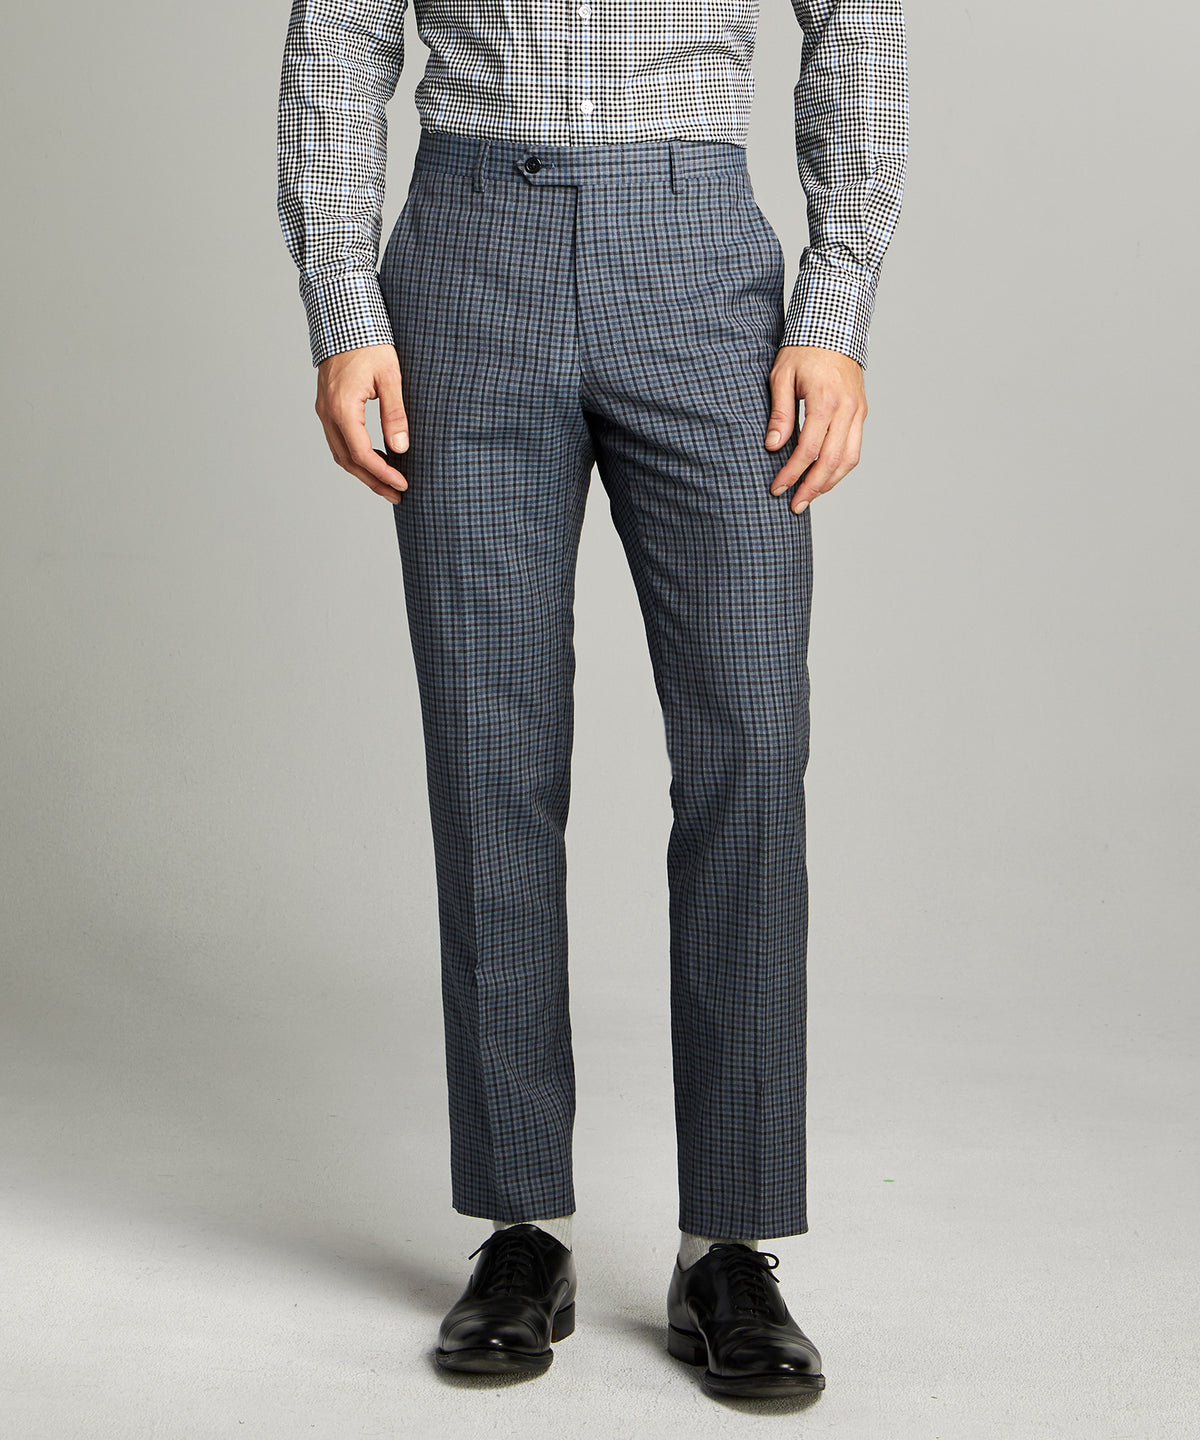 Sutton Wool Linen Suit in Grey Navy Check - Todd Snyder